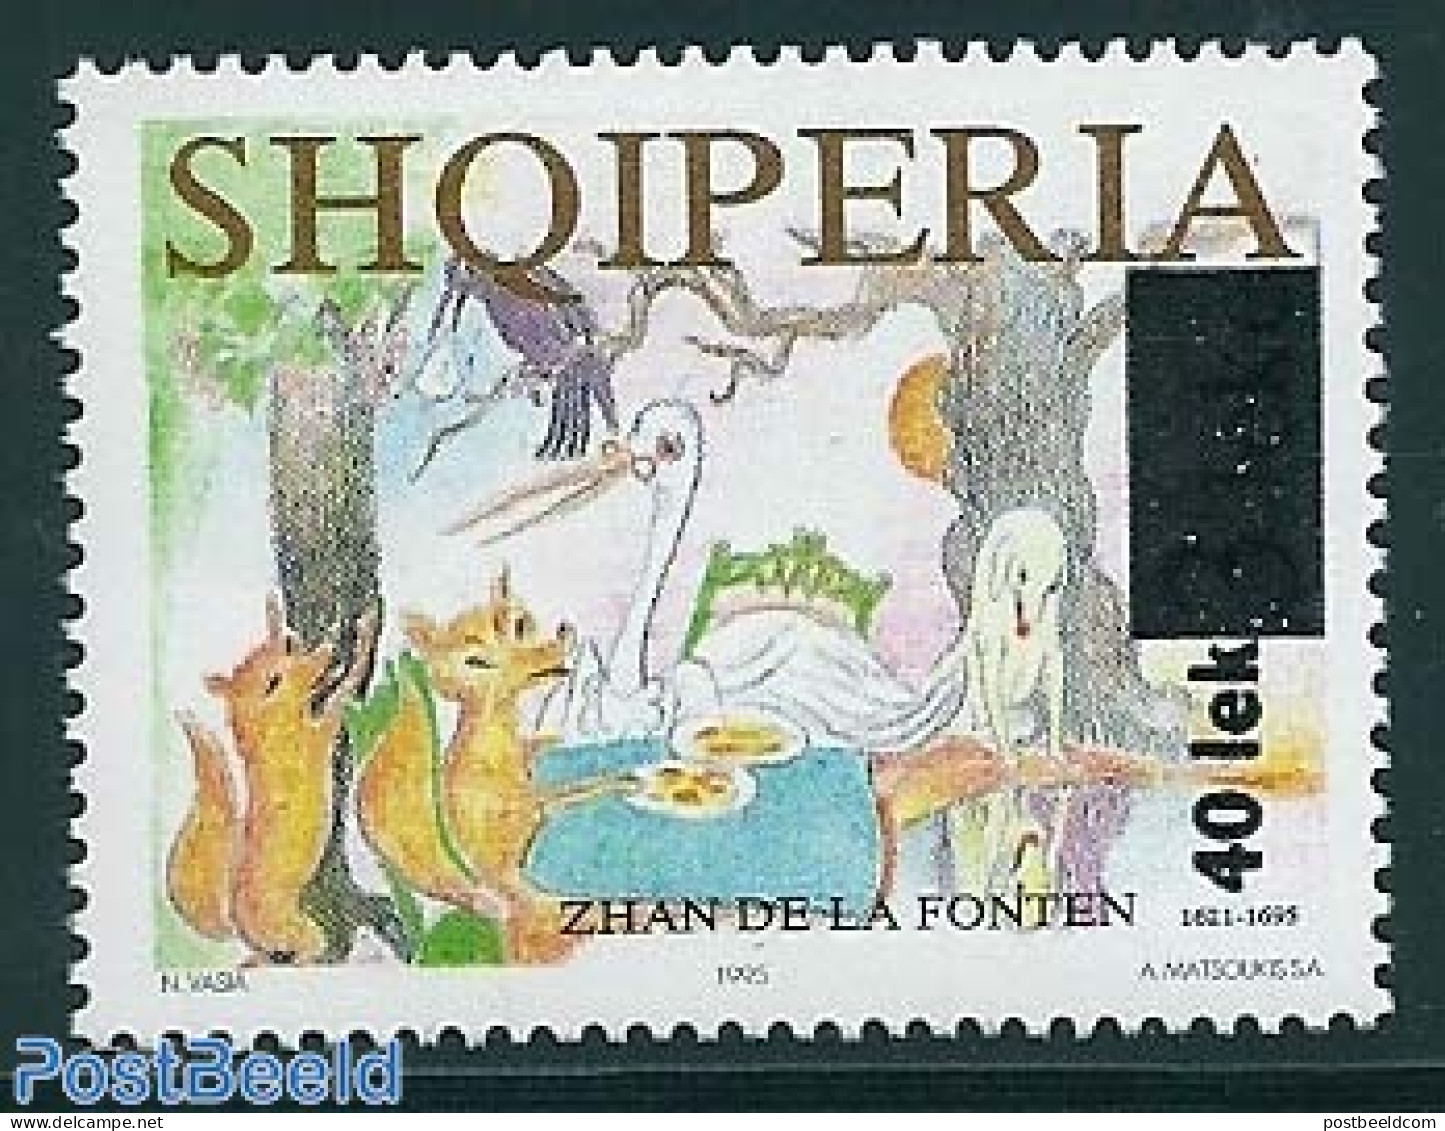 Albania 2006 40L On 3L, Stamp Out Of Set, Mint NH, Art - Fairytales - Contes, Fables & Légendes